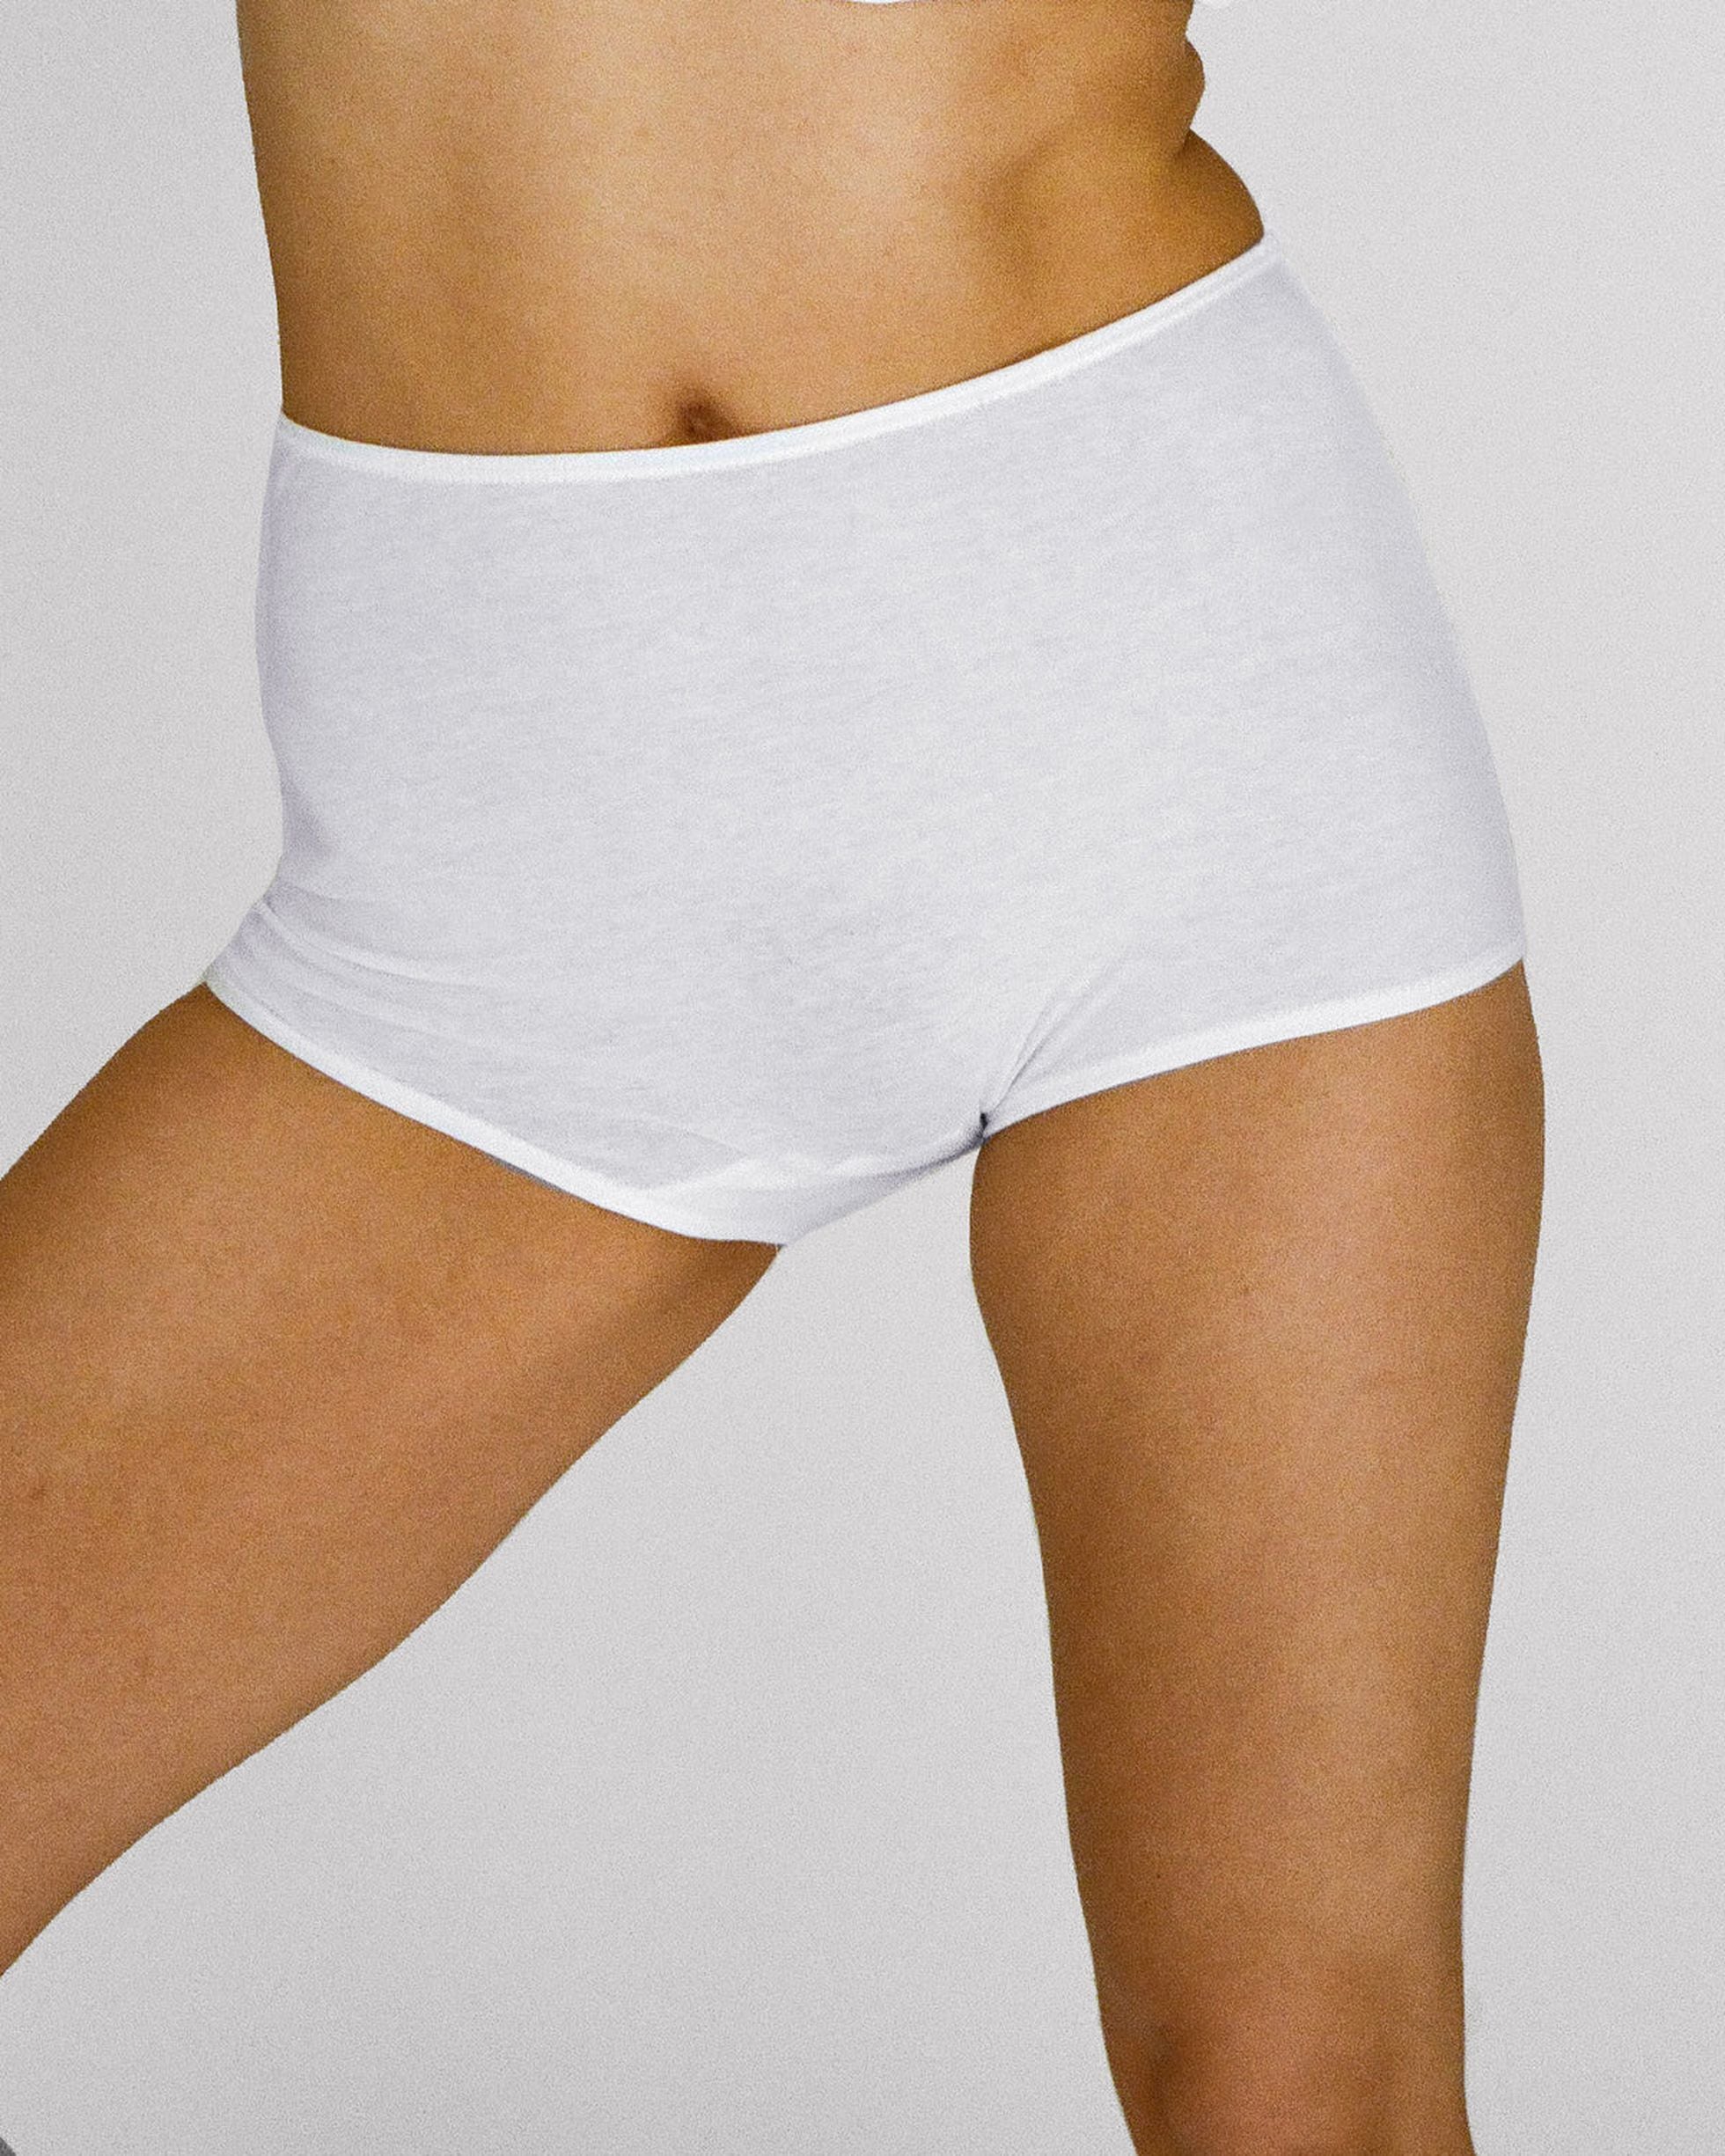 ONLY FOR LADIES: 7 Advantages of Sleeping Without Underwear at Night